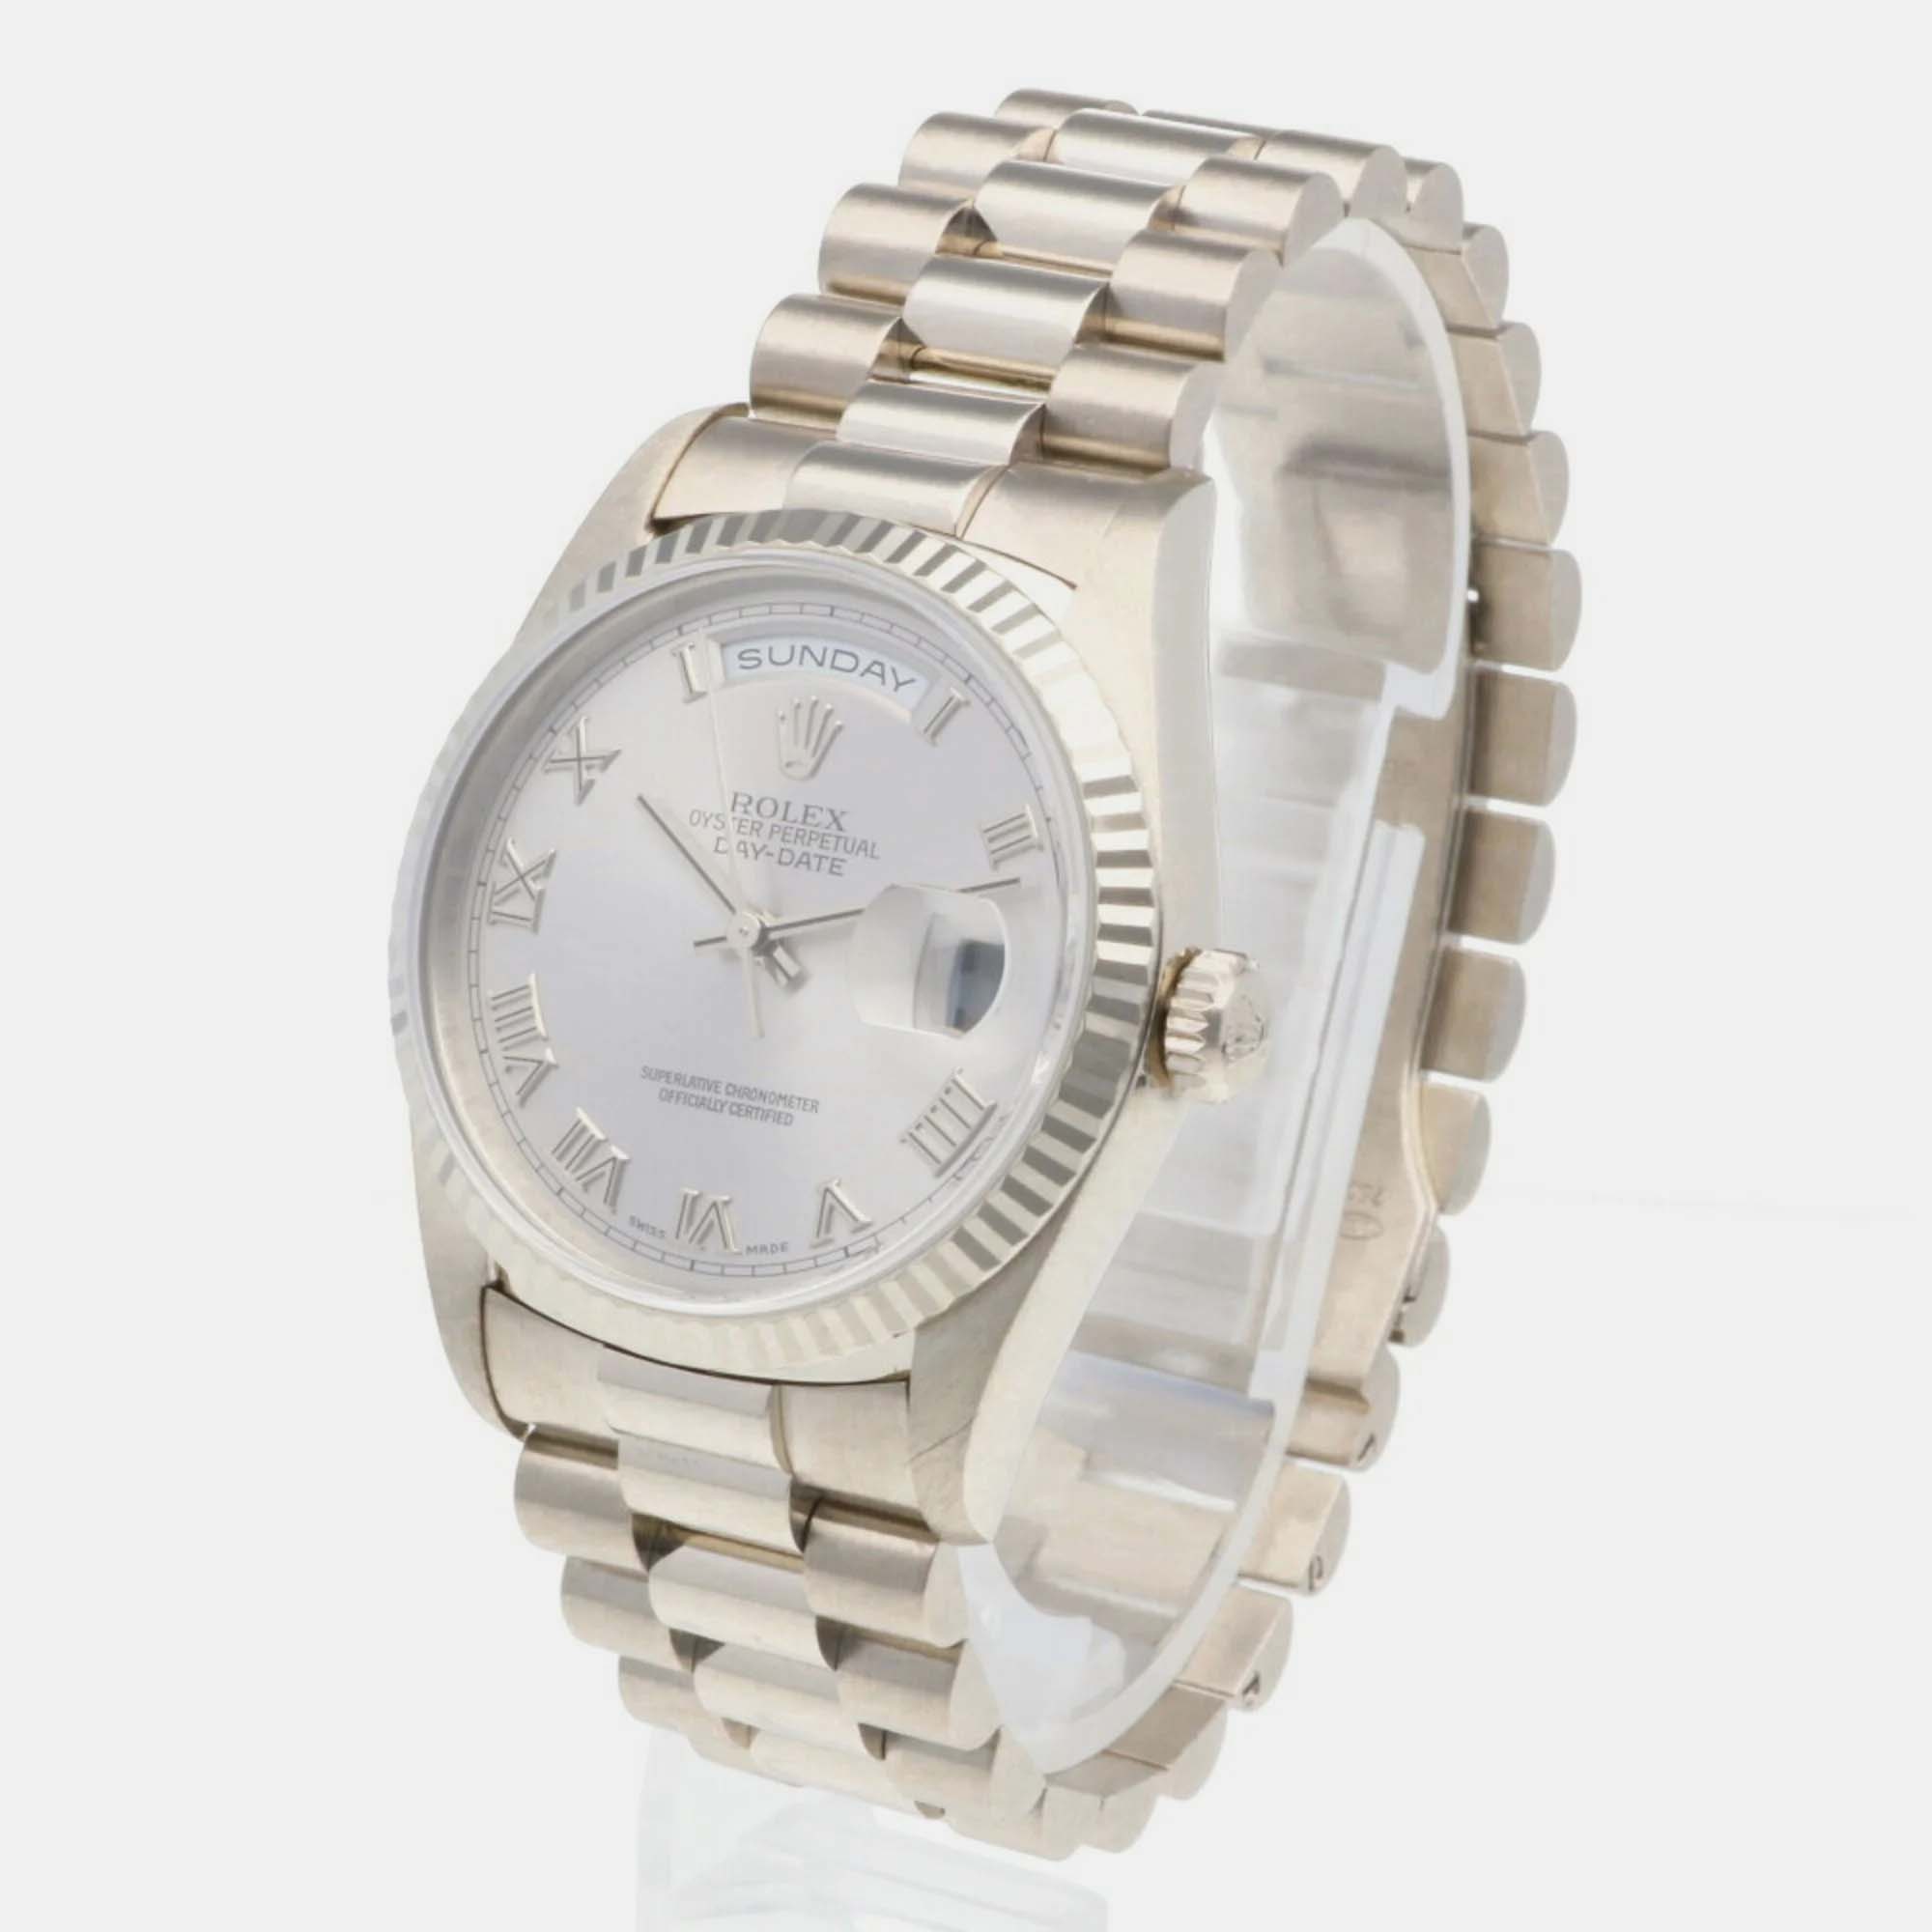 Rolex White 18k White Gold And Stainless Steel Day-Date 18239 Automatic Men's Wristwatch 36 Mm